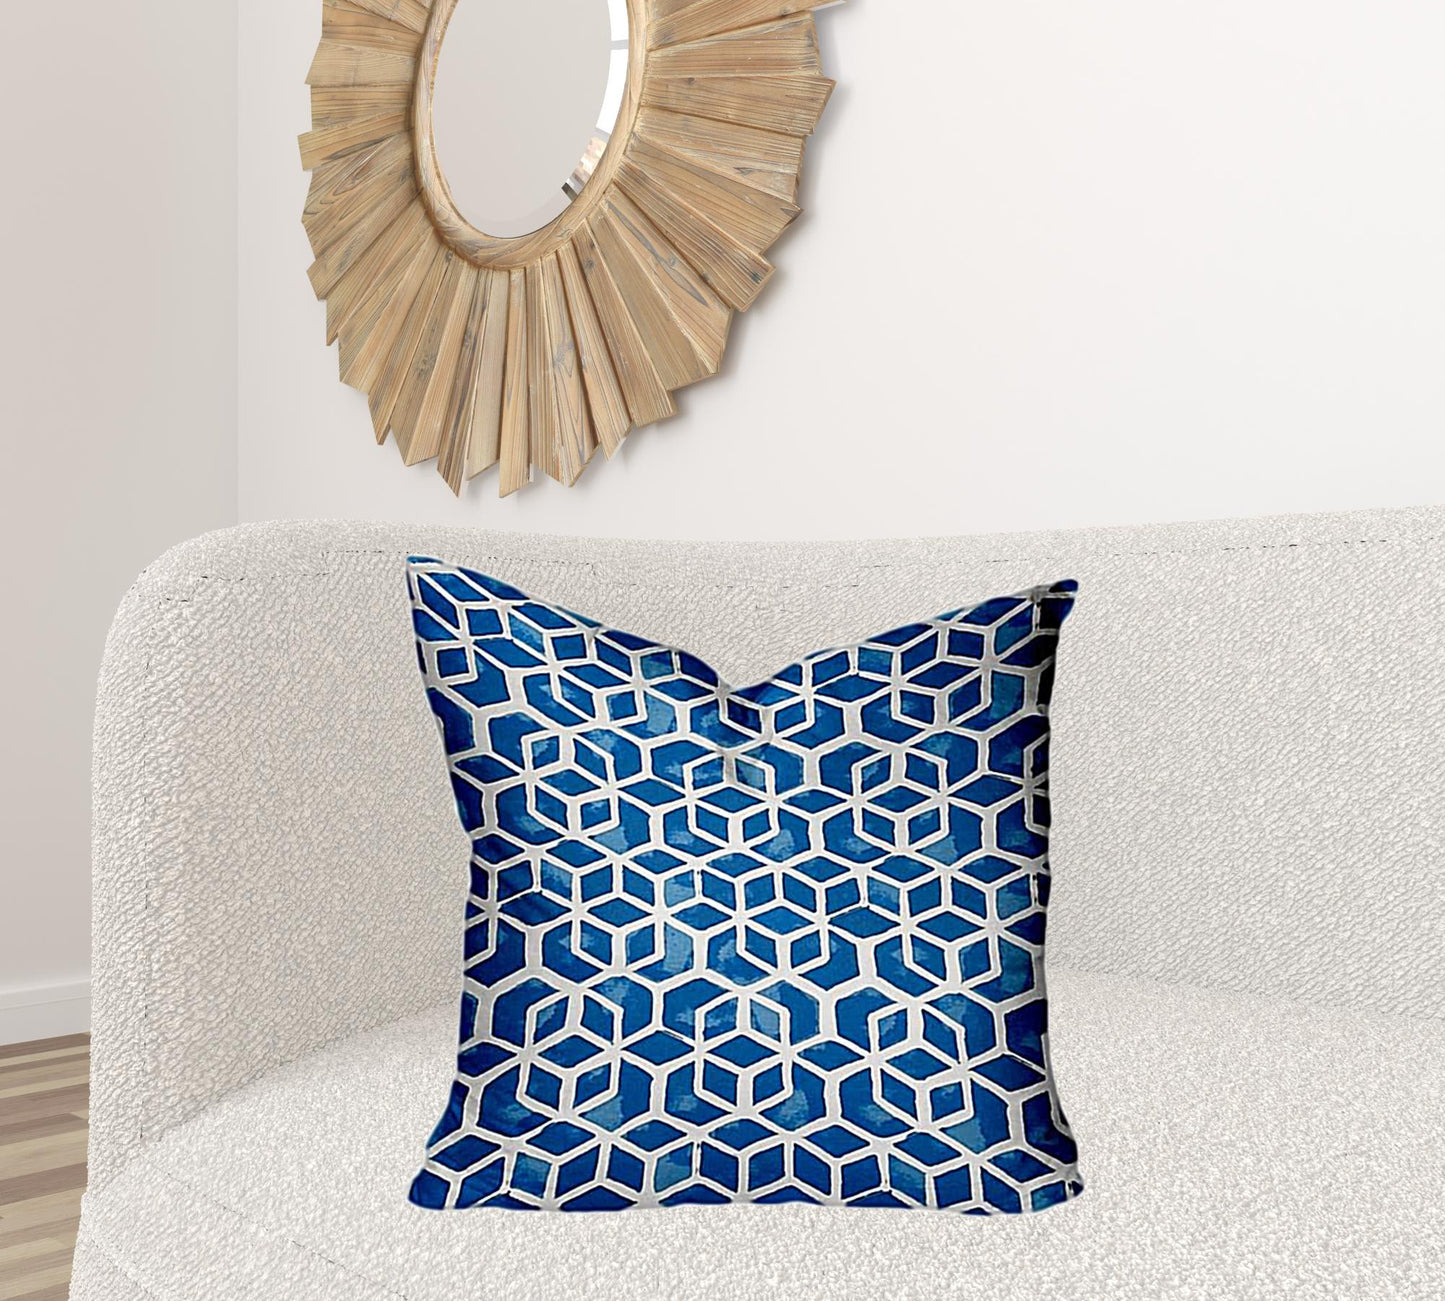 24" X 24" Blue And White Blown Seam Geometric Throw Indoor Outdoor Pillow